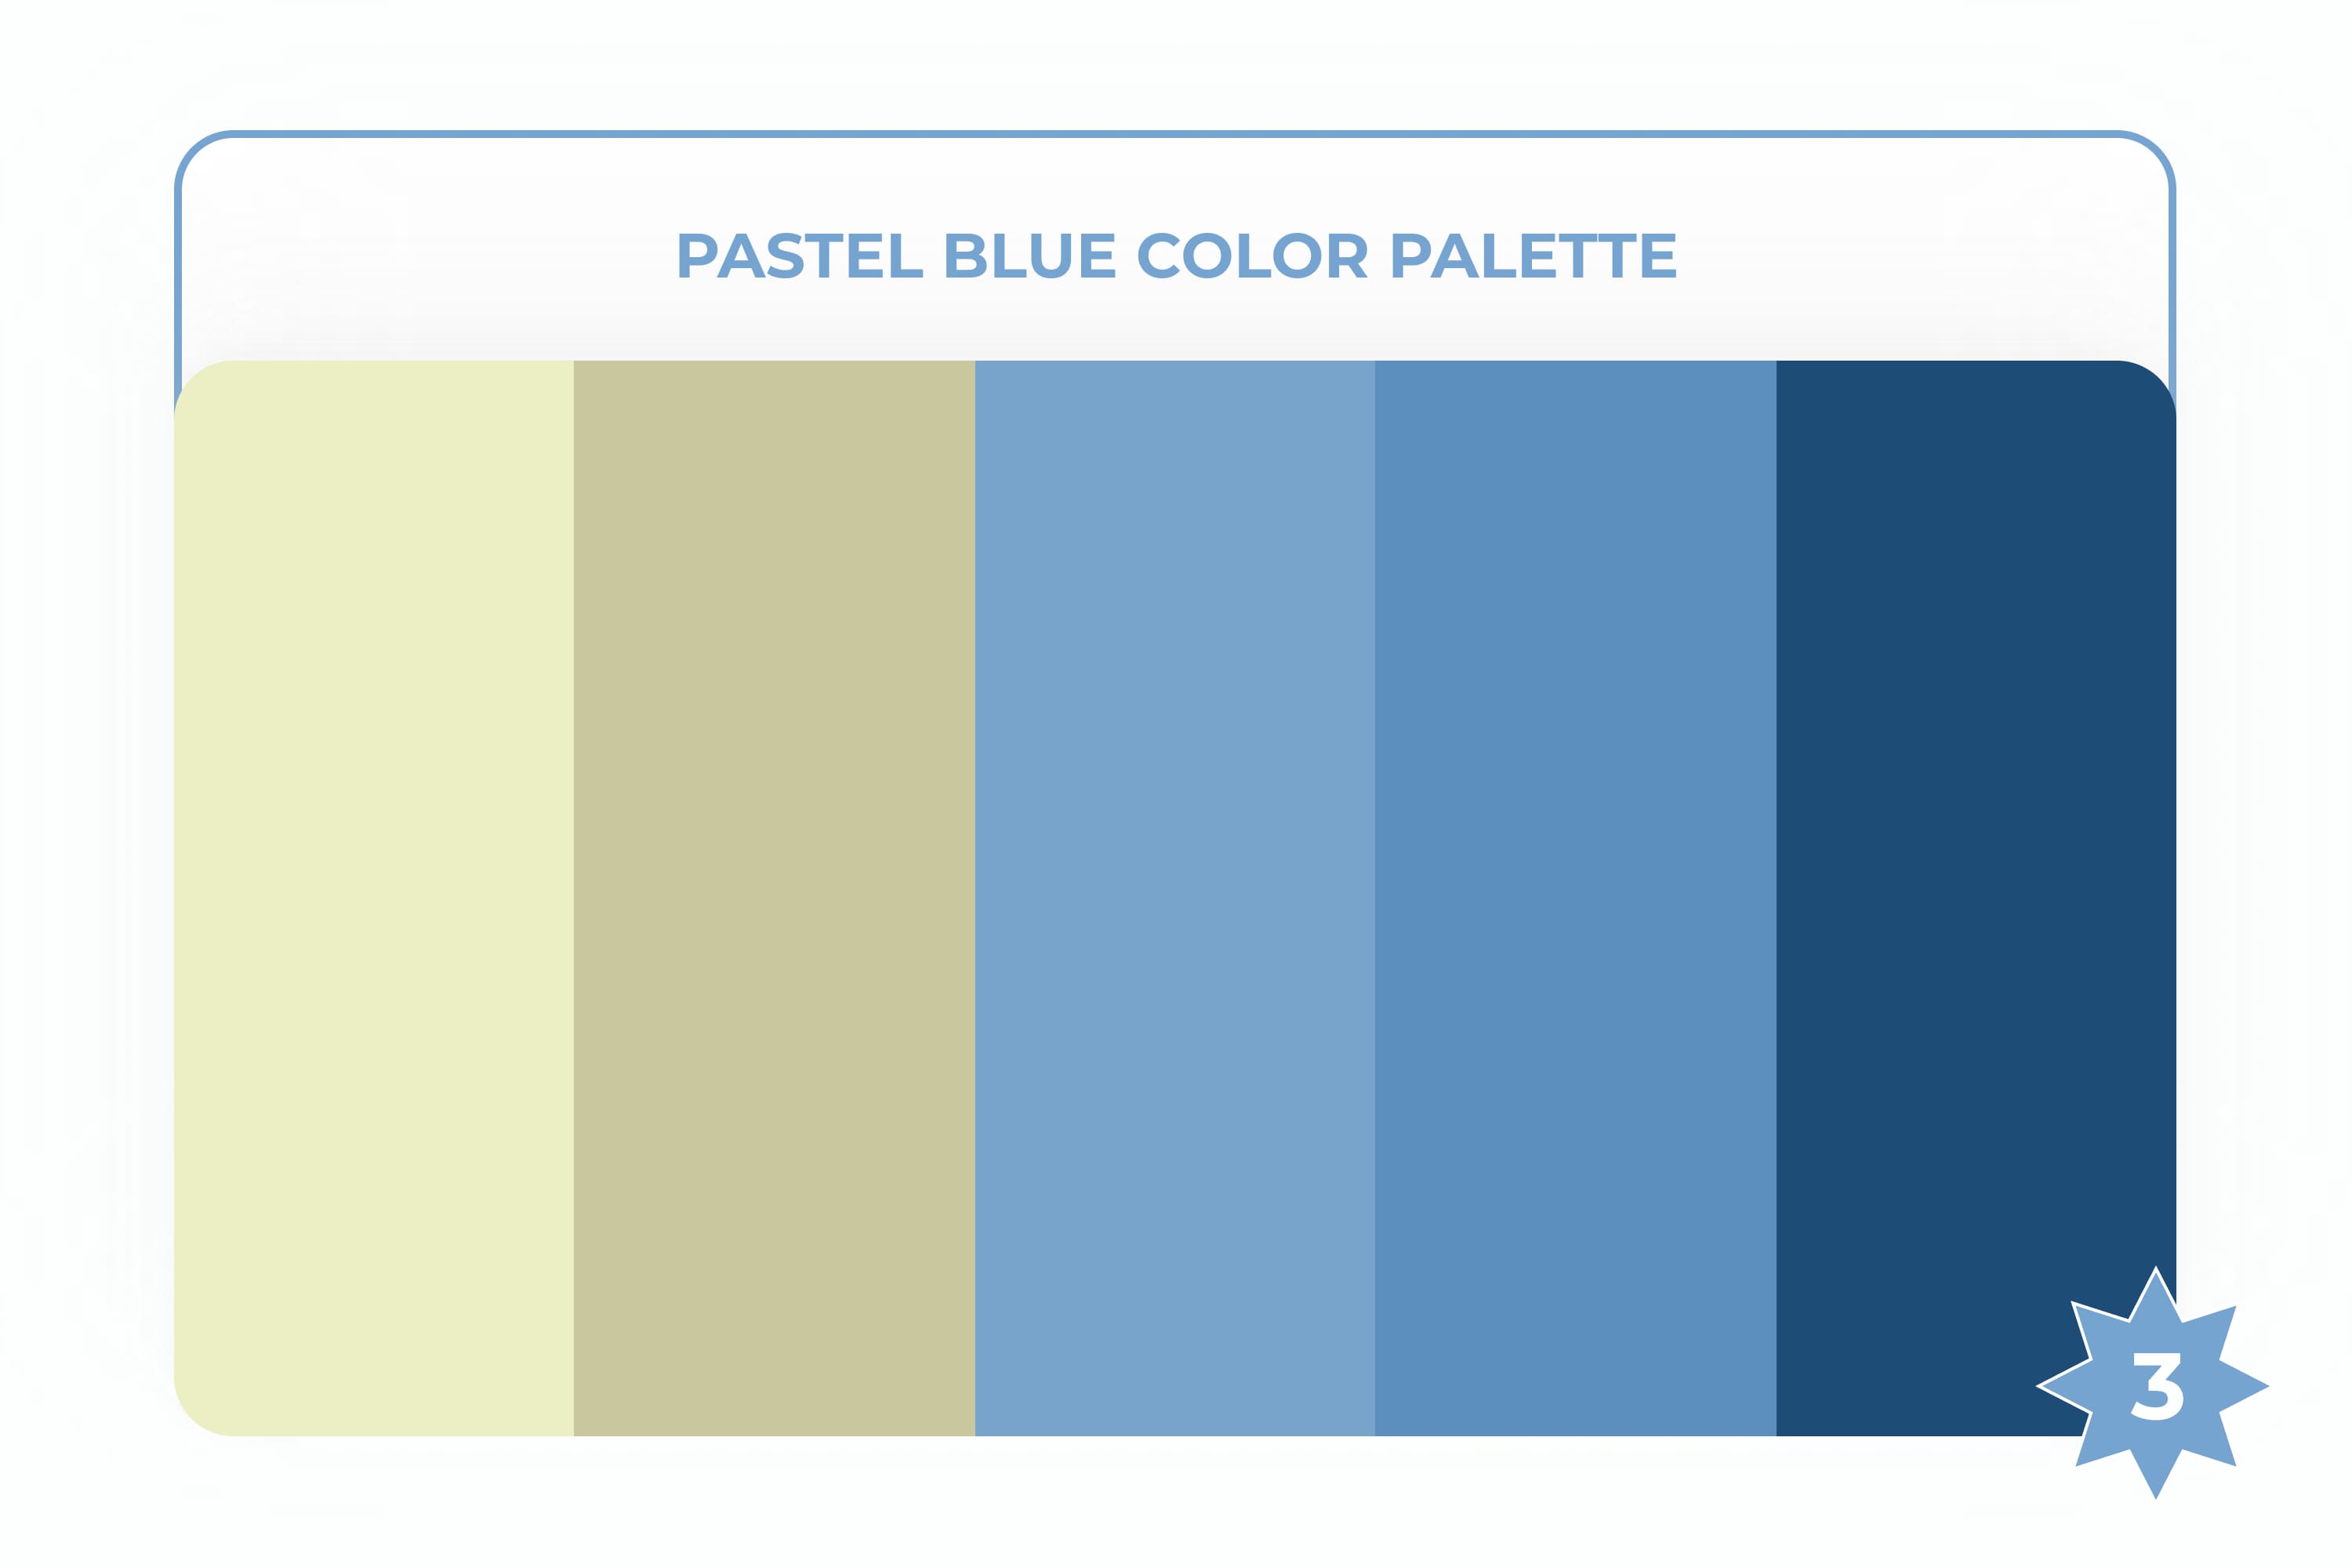 How to Make a Pastel Color Palette in Photoshop